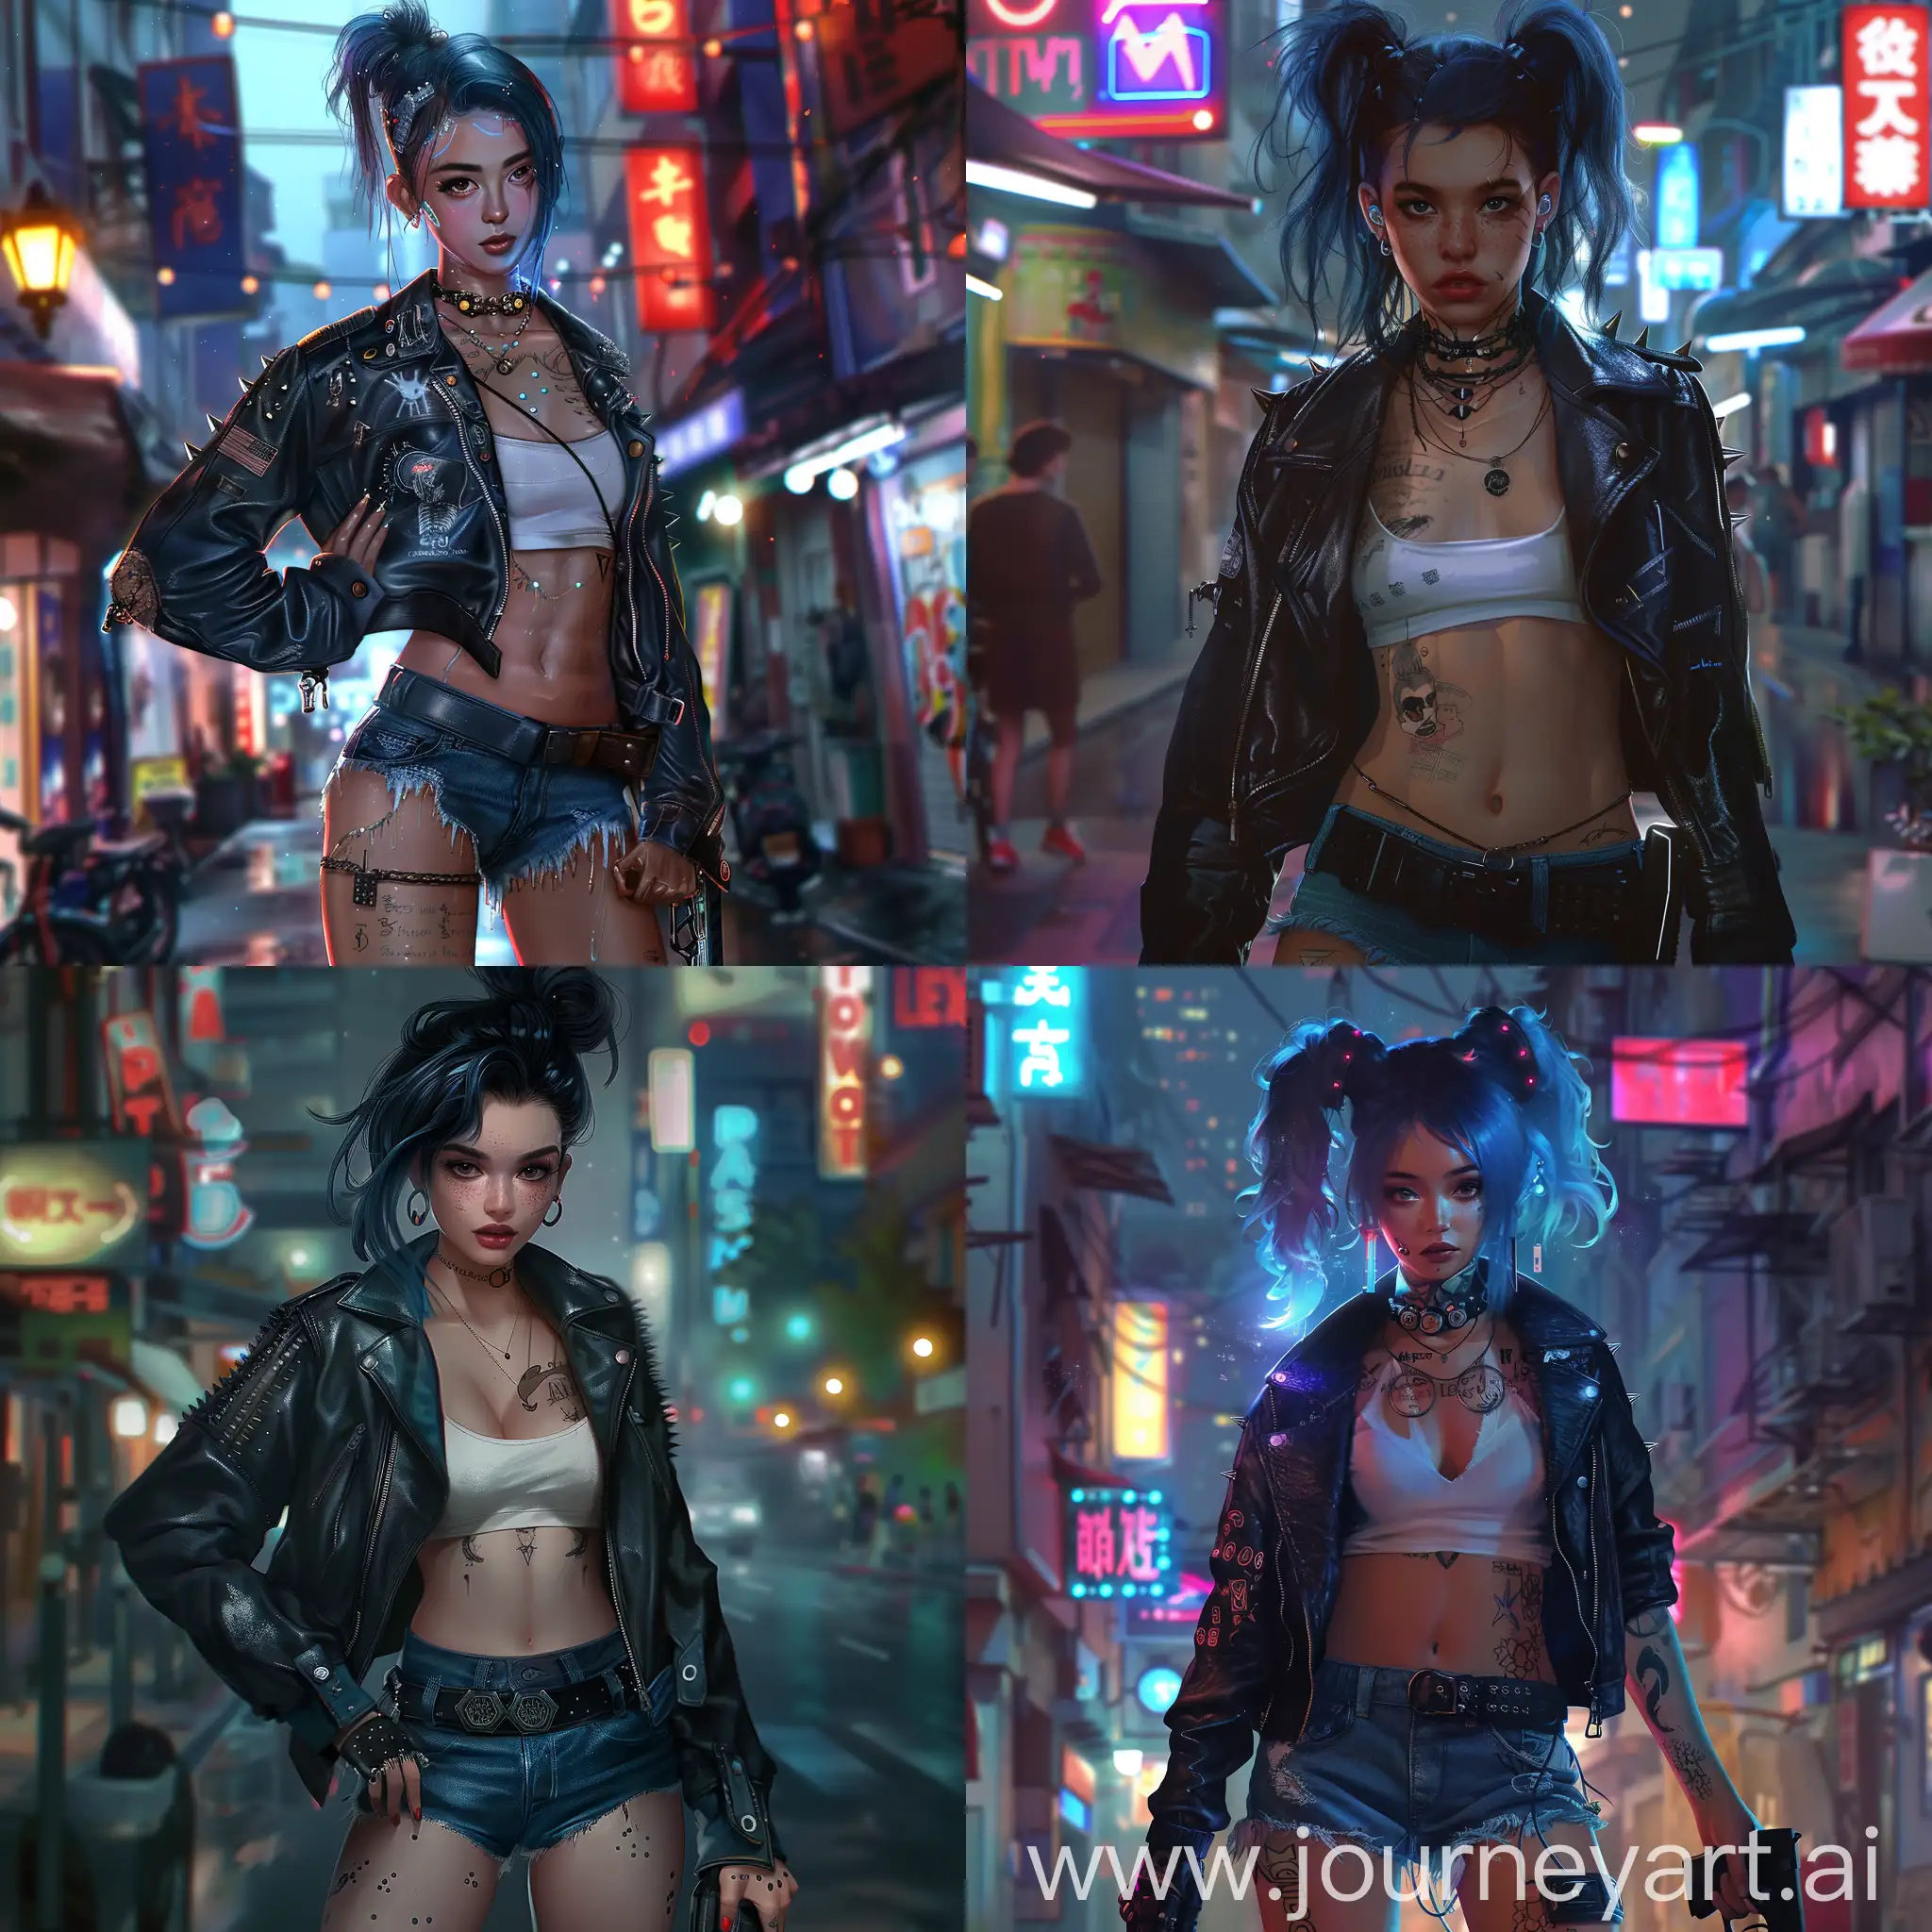 18-year-old netrunner girl, cute face, numerous freckles on her face, brown eyes, dark blue hair tied in a bun, plump lips, pierced ears, tall, curvy legs, dressed in high black boots, tight denim shorts, white top and biker leather jacket with spikes on the shoulders, this the jacket does not fasten, so that the belly and top are visible. Tattoos on the body. THE RIGHT HAND WAS REPLACED WITH A PROMINENT CYBERNETIC BLACK IMPLANT (PROSTHESIS), an implant on the left leg, an implant on the abdomen, an implant on the chest, a small implant on the cheek, all implants in the style of cyberpunk 2077, microchip connectors on the neck, a holster with a pistol (lexinkton) on the belt. It stands against the background of the street of the city "night city" at night. In the style of cyberpunk 2077.